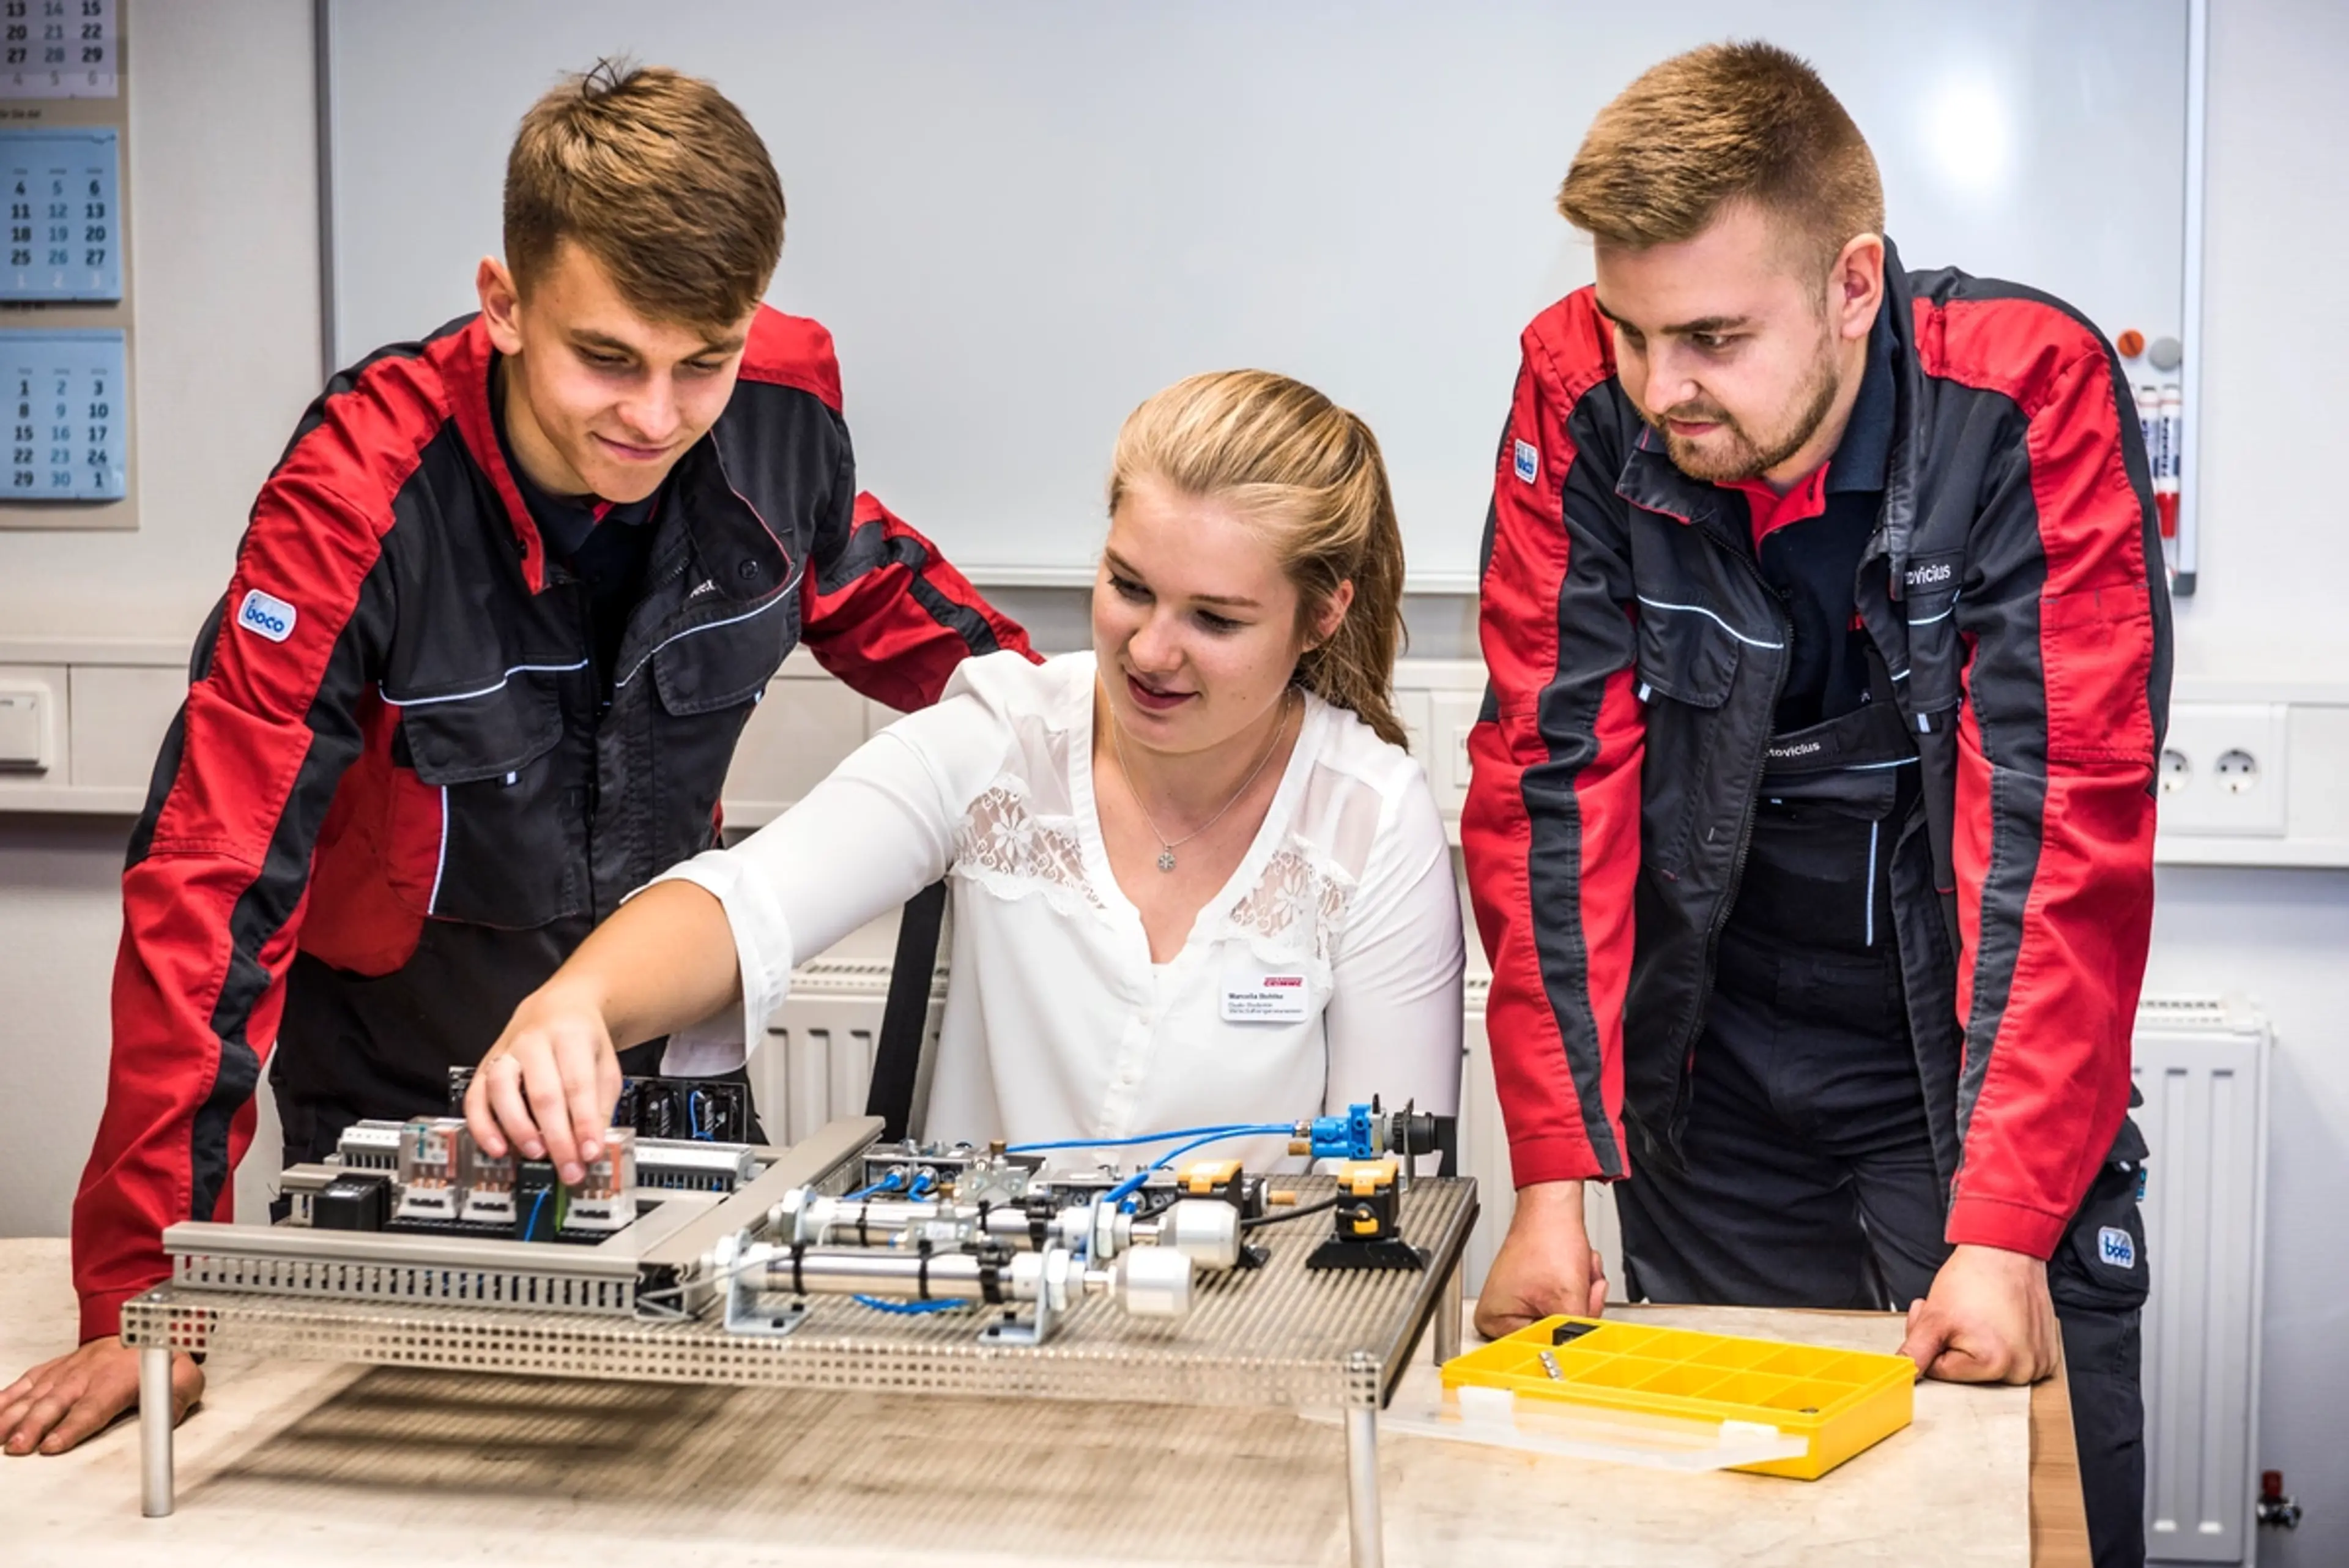 Three apprentices work on a model of an electrical component